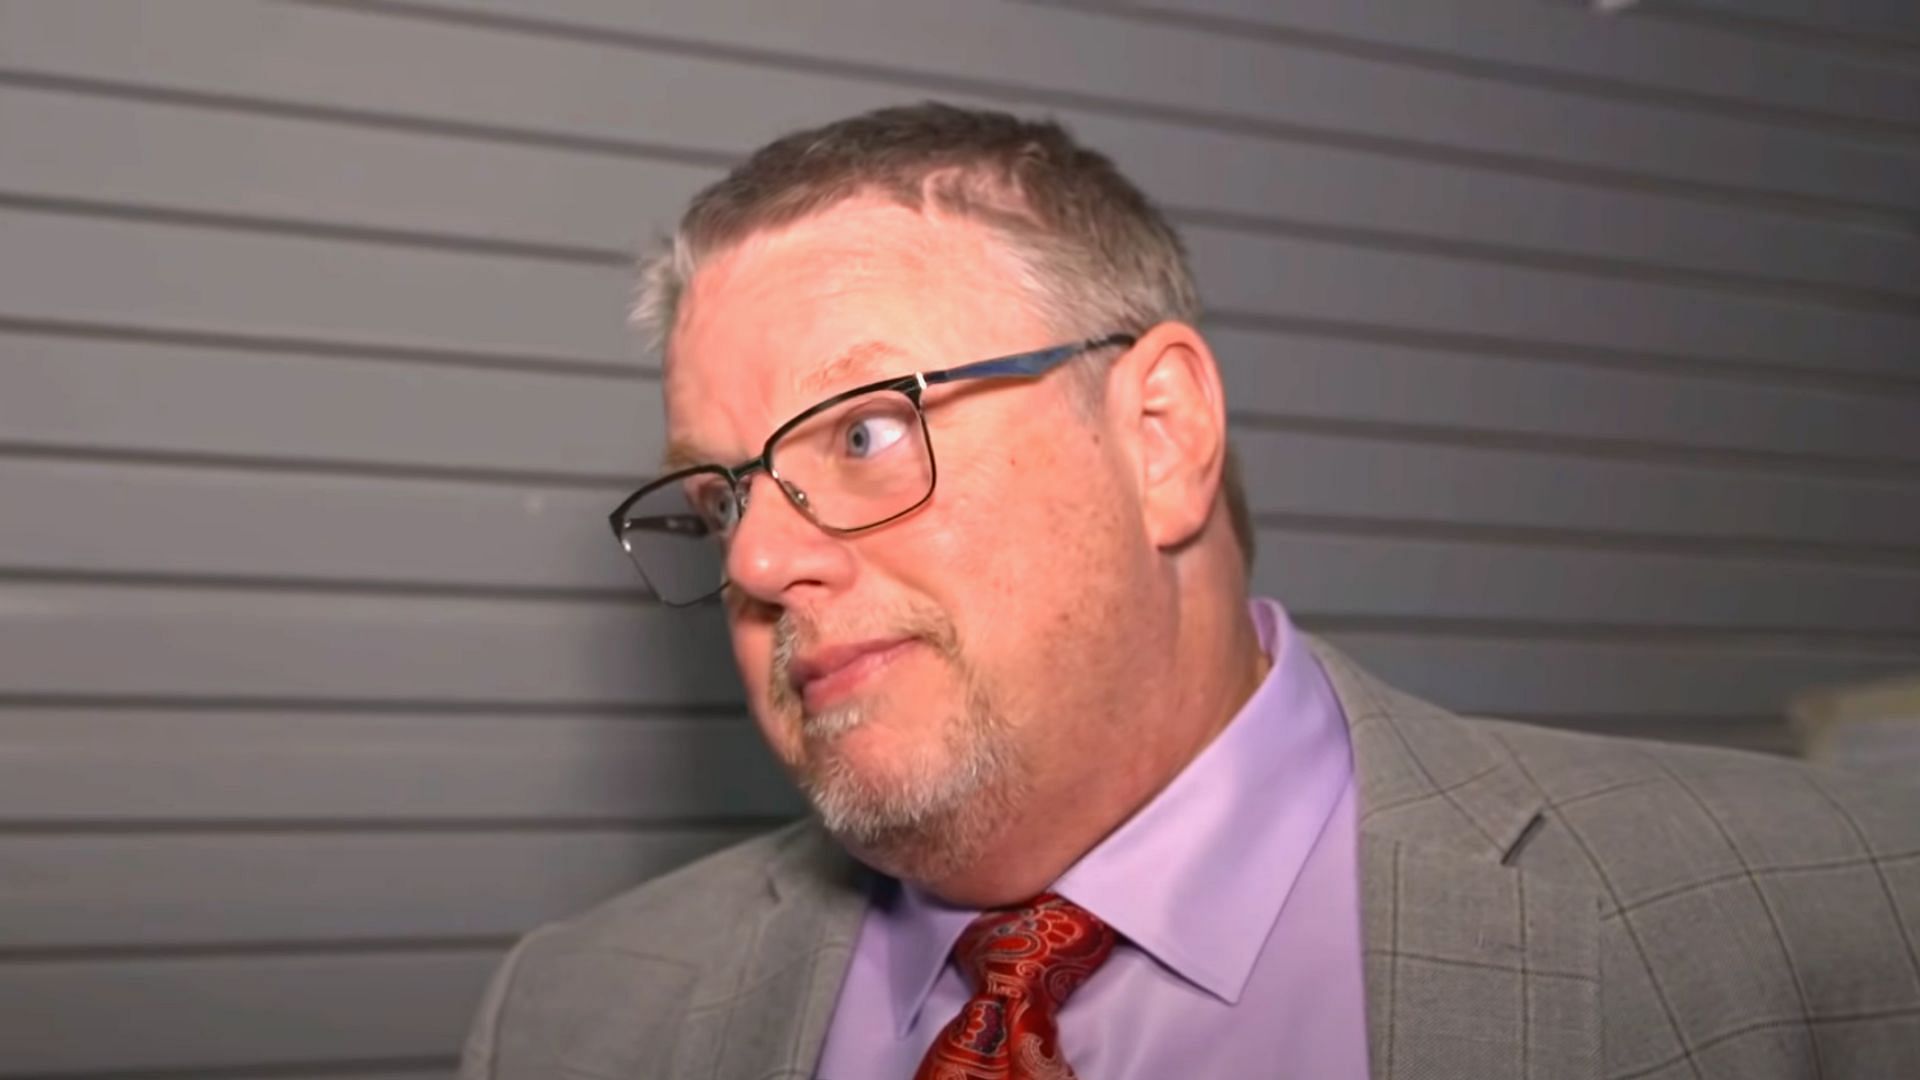 WWE RAW and SmackDown's Executive Director Bruce Prichard.